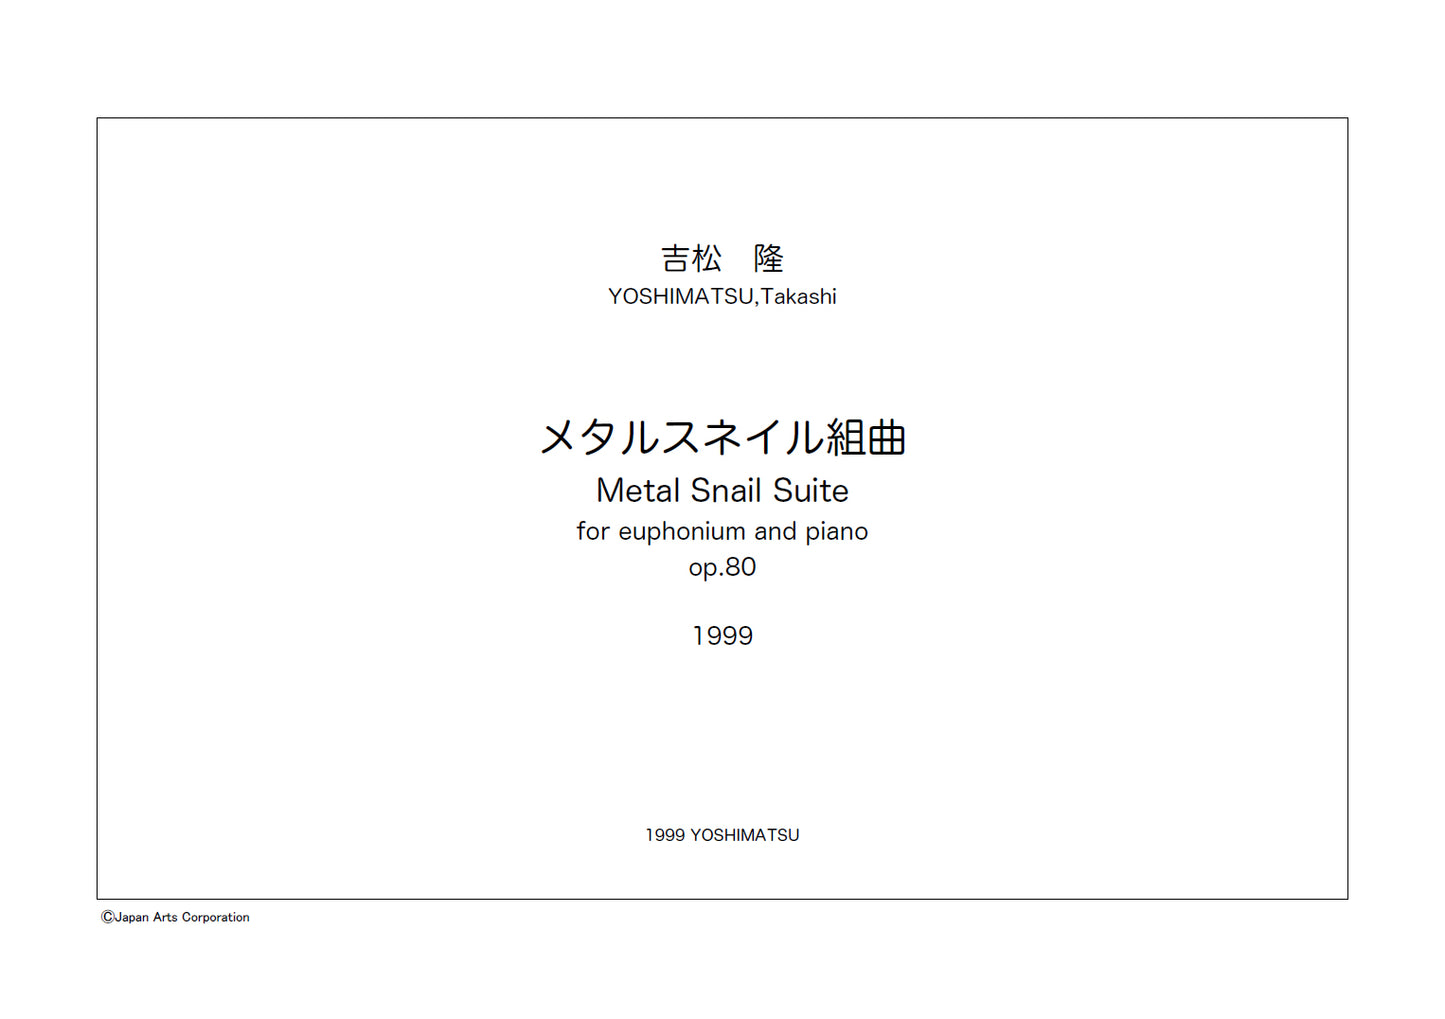 Metal Snail Suite for euphonium and piano op.80 (Study Score)